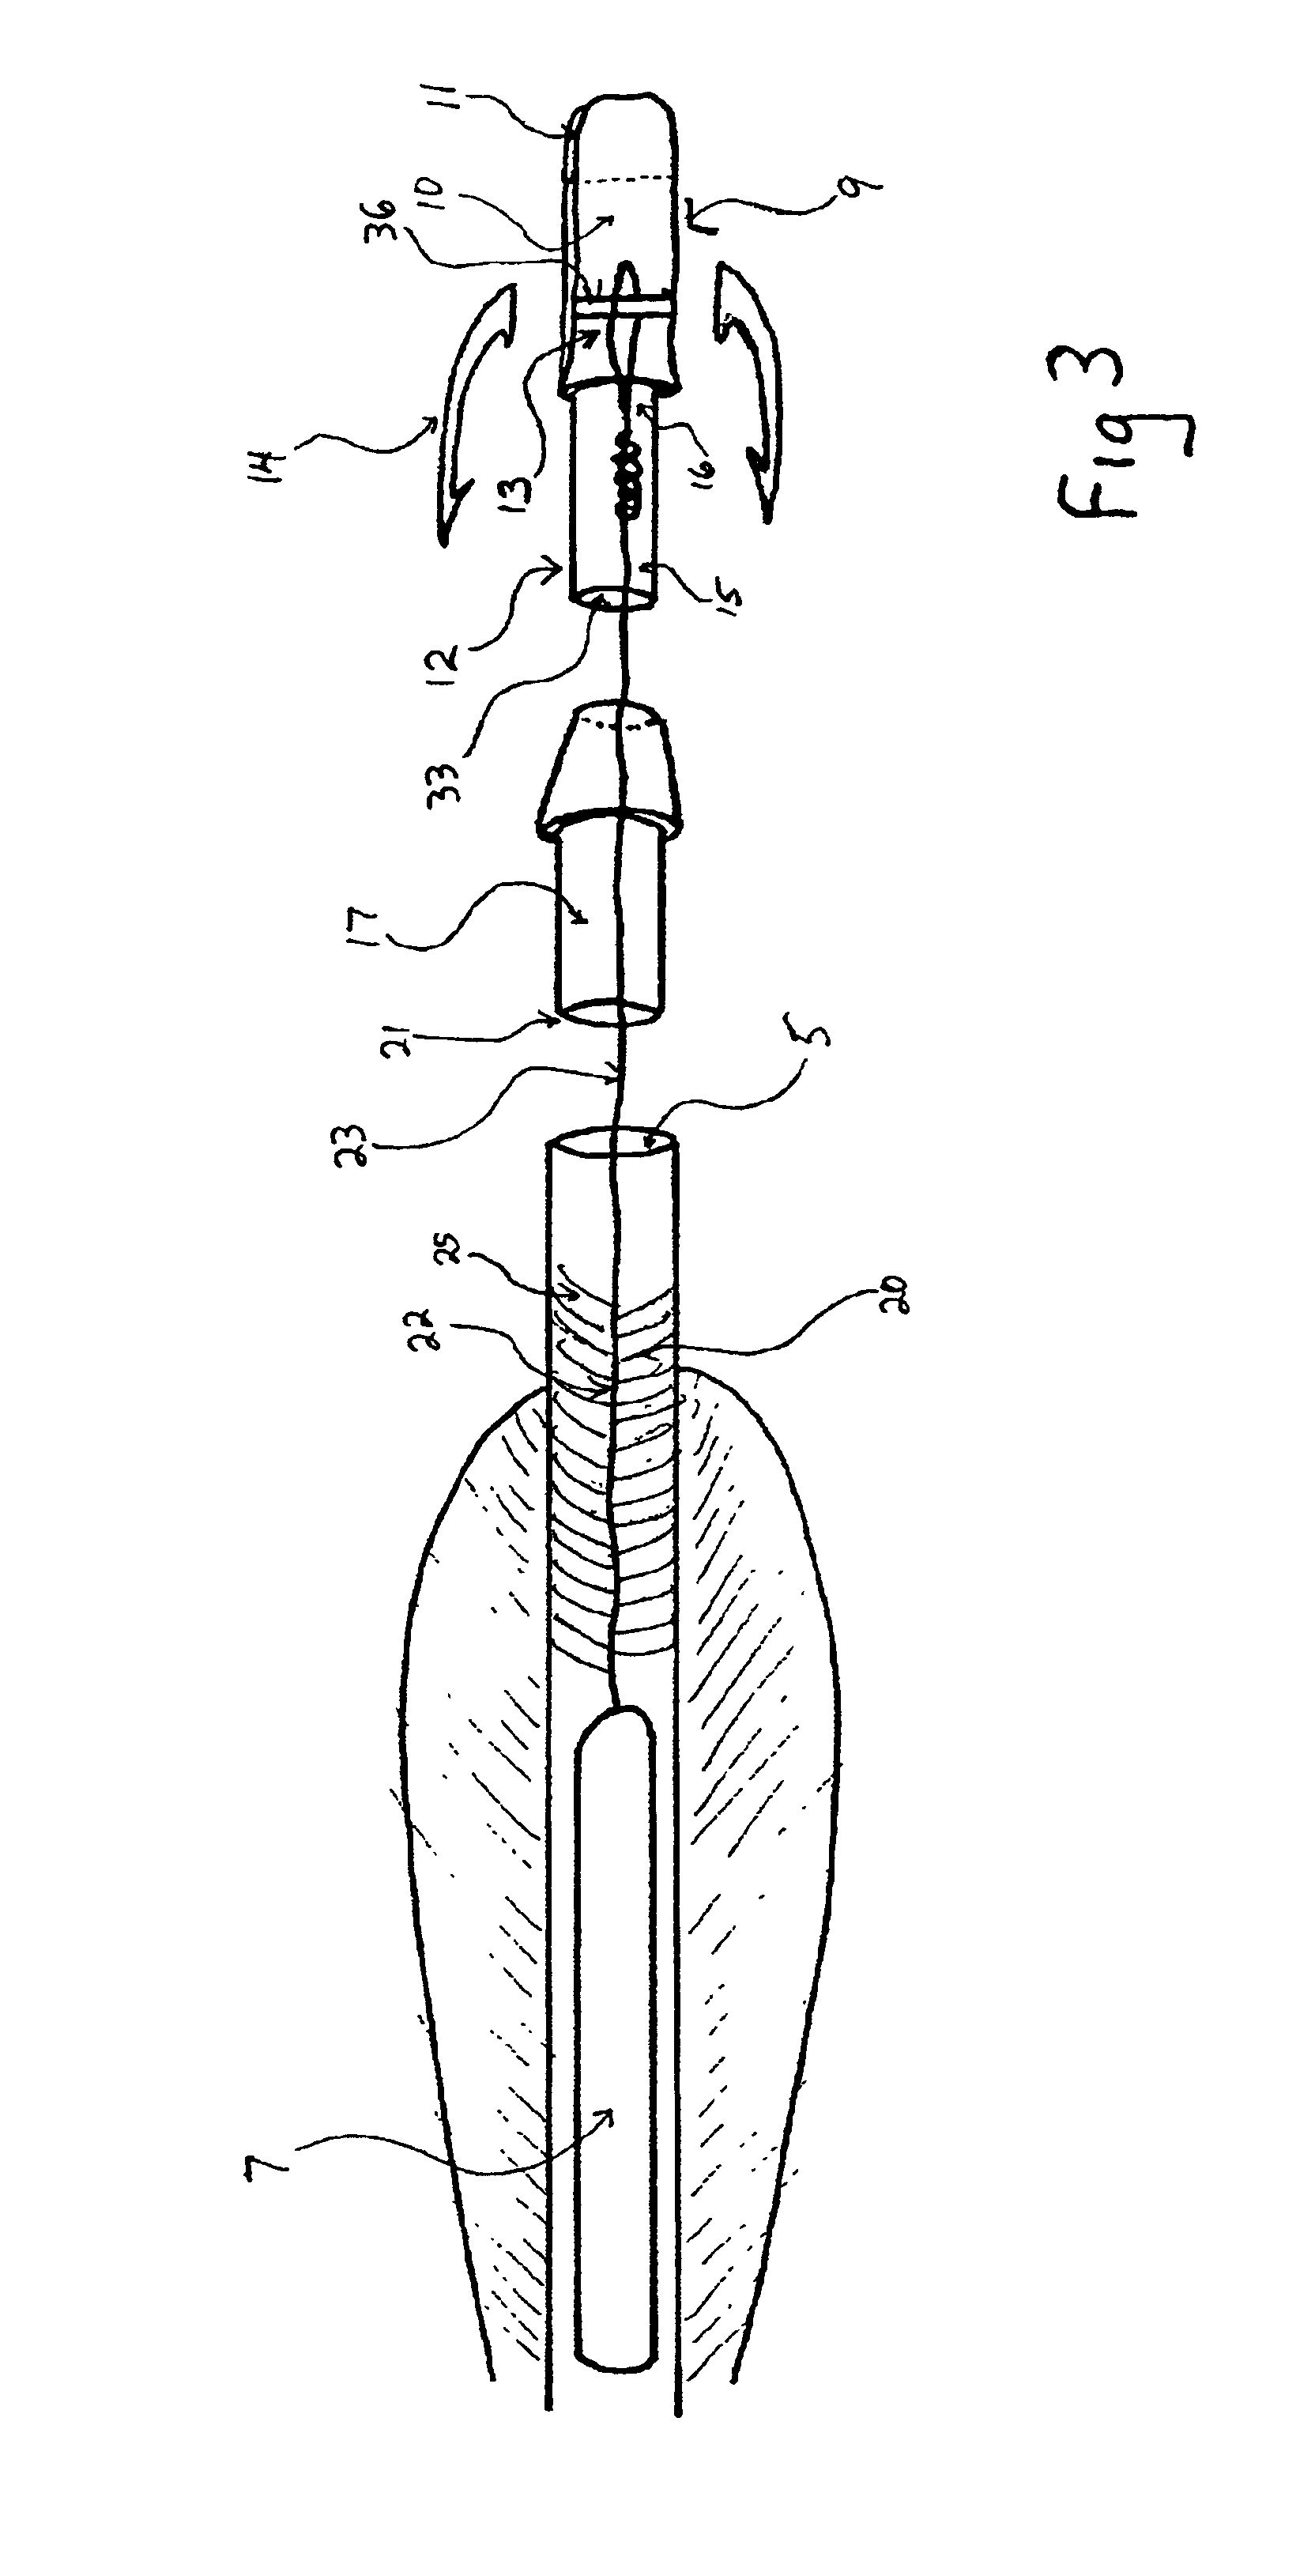 Detachable nock for detaching a locator from an arrow